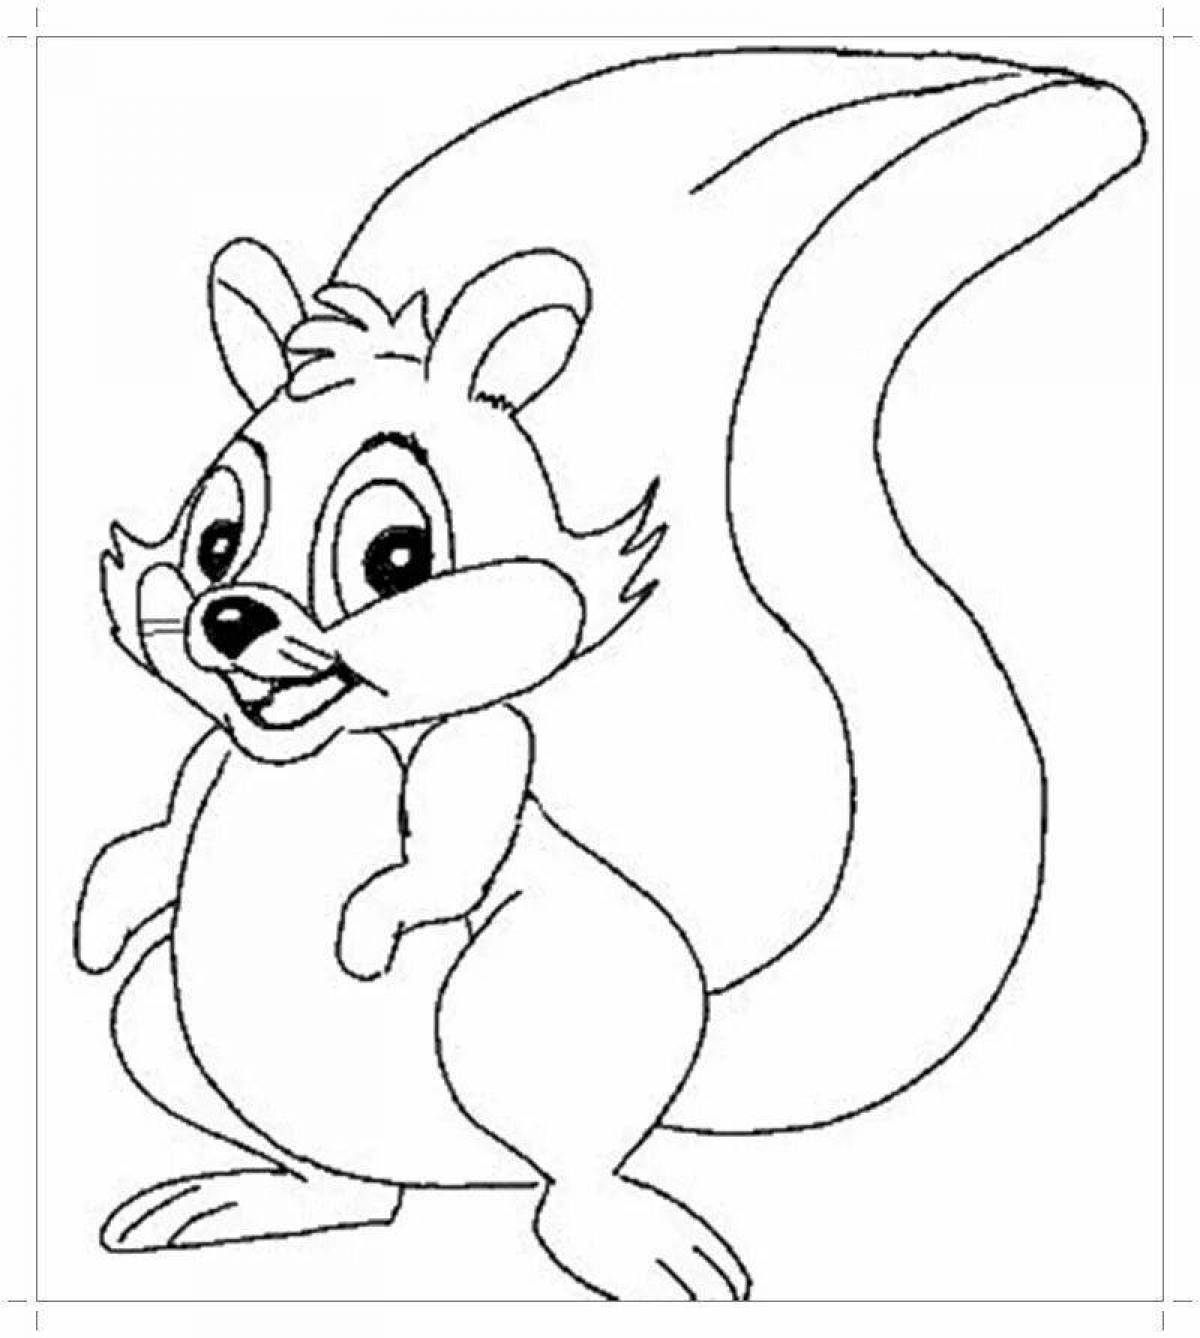 Fun coloring squirrel for children 3-4 years old